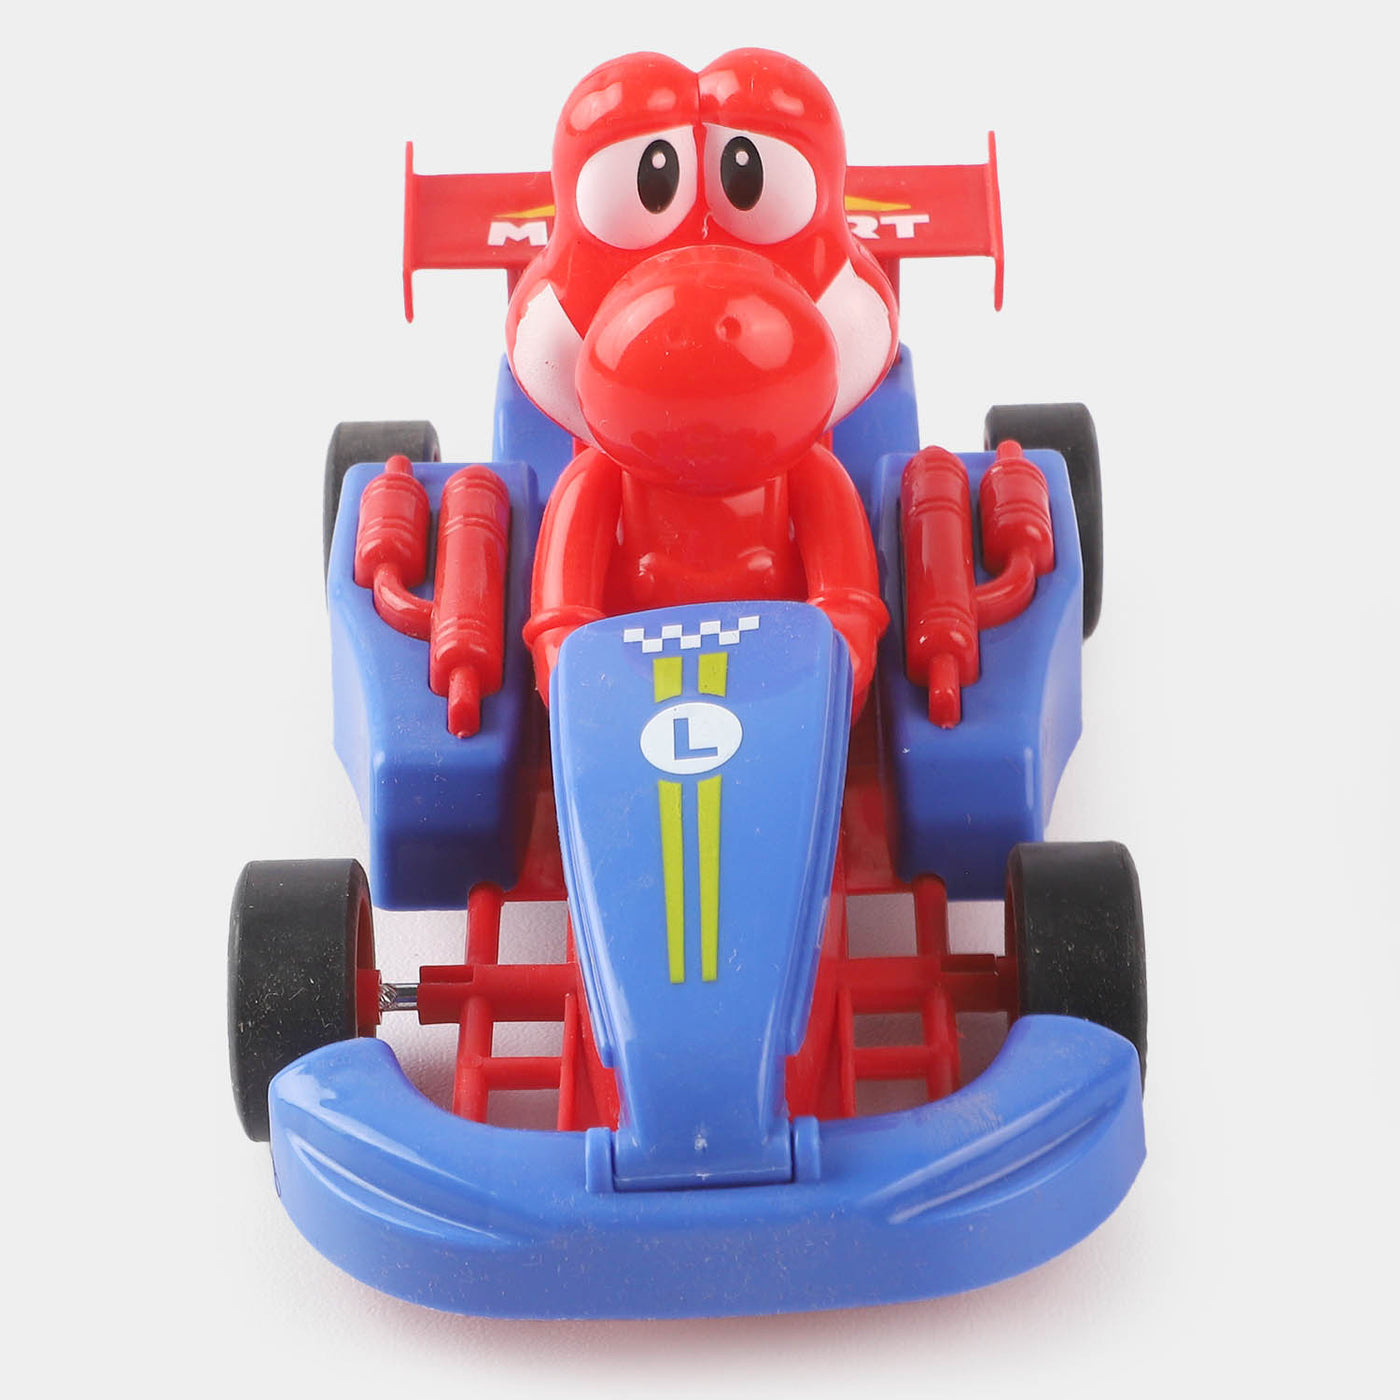 Friction Mini Sports Vehicle Toy For Kids